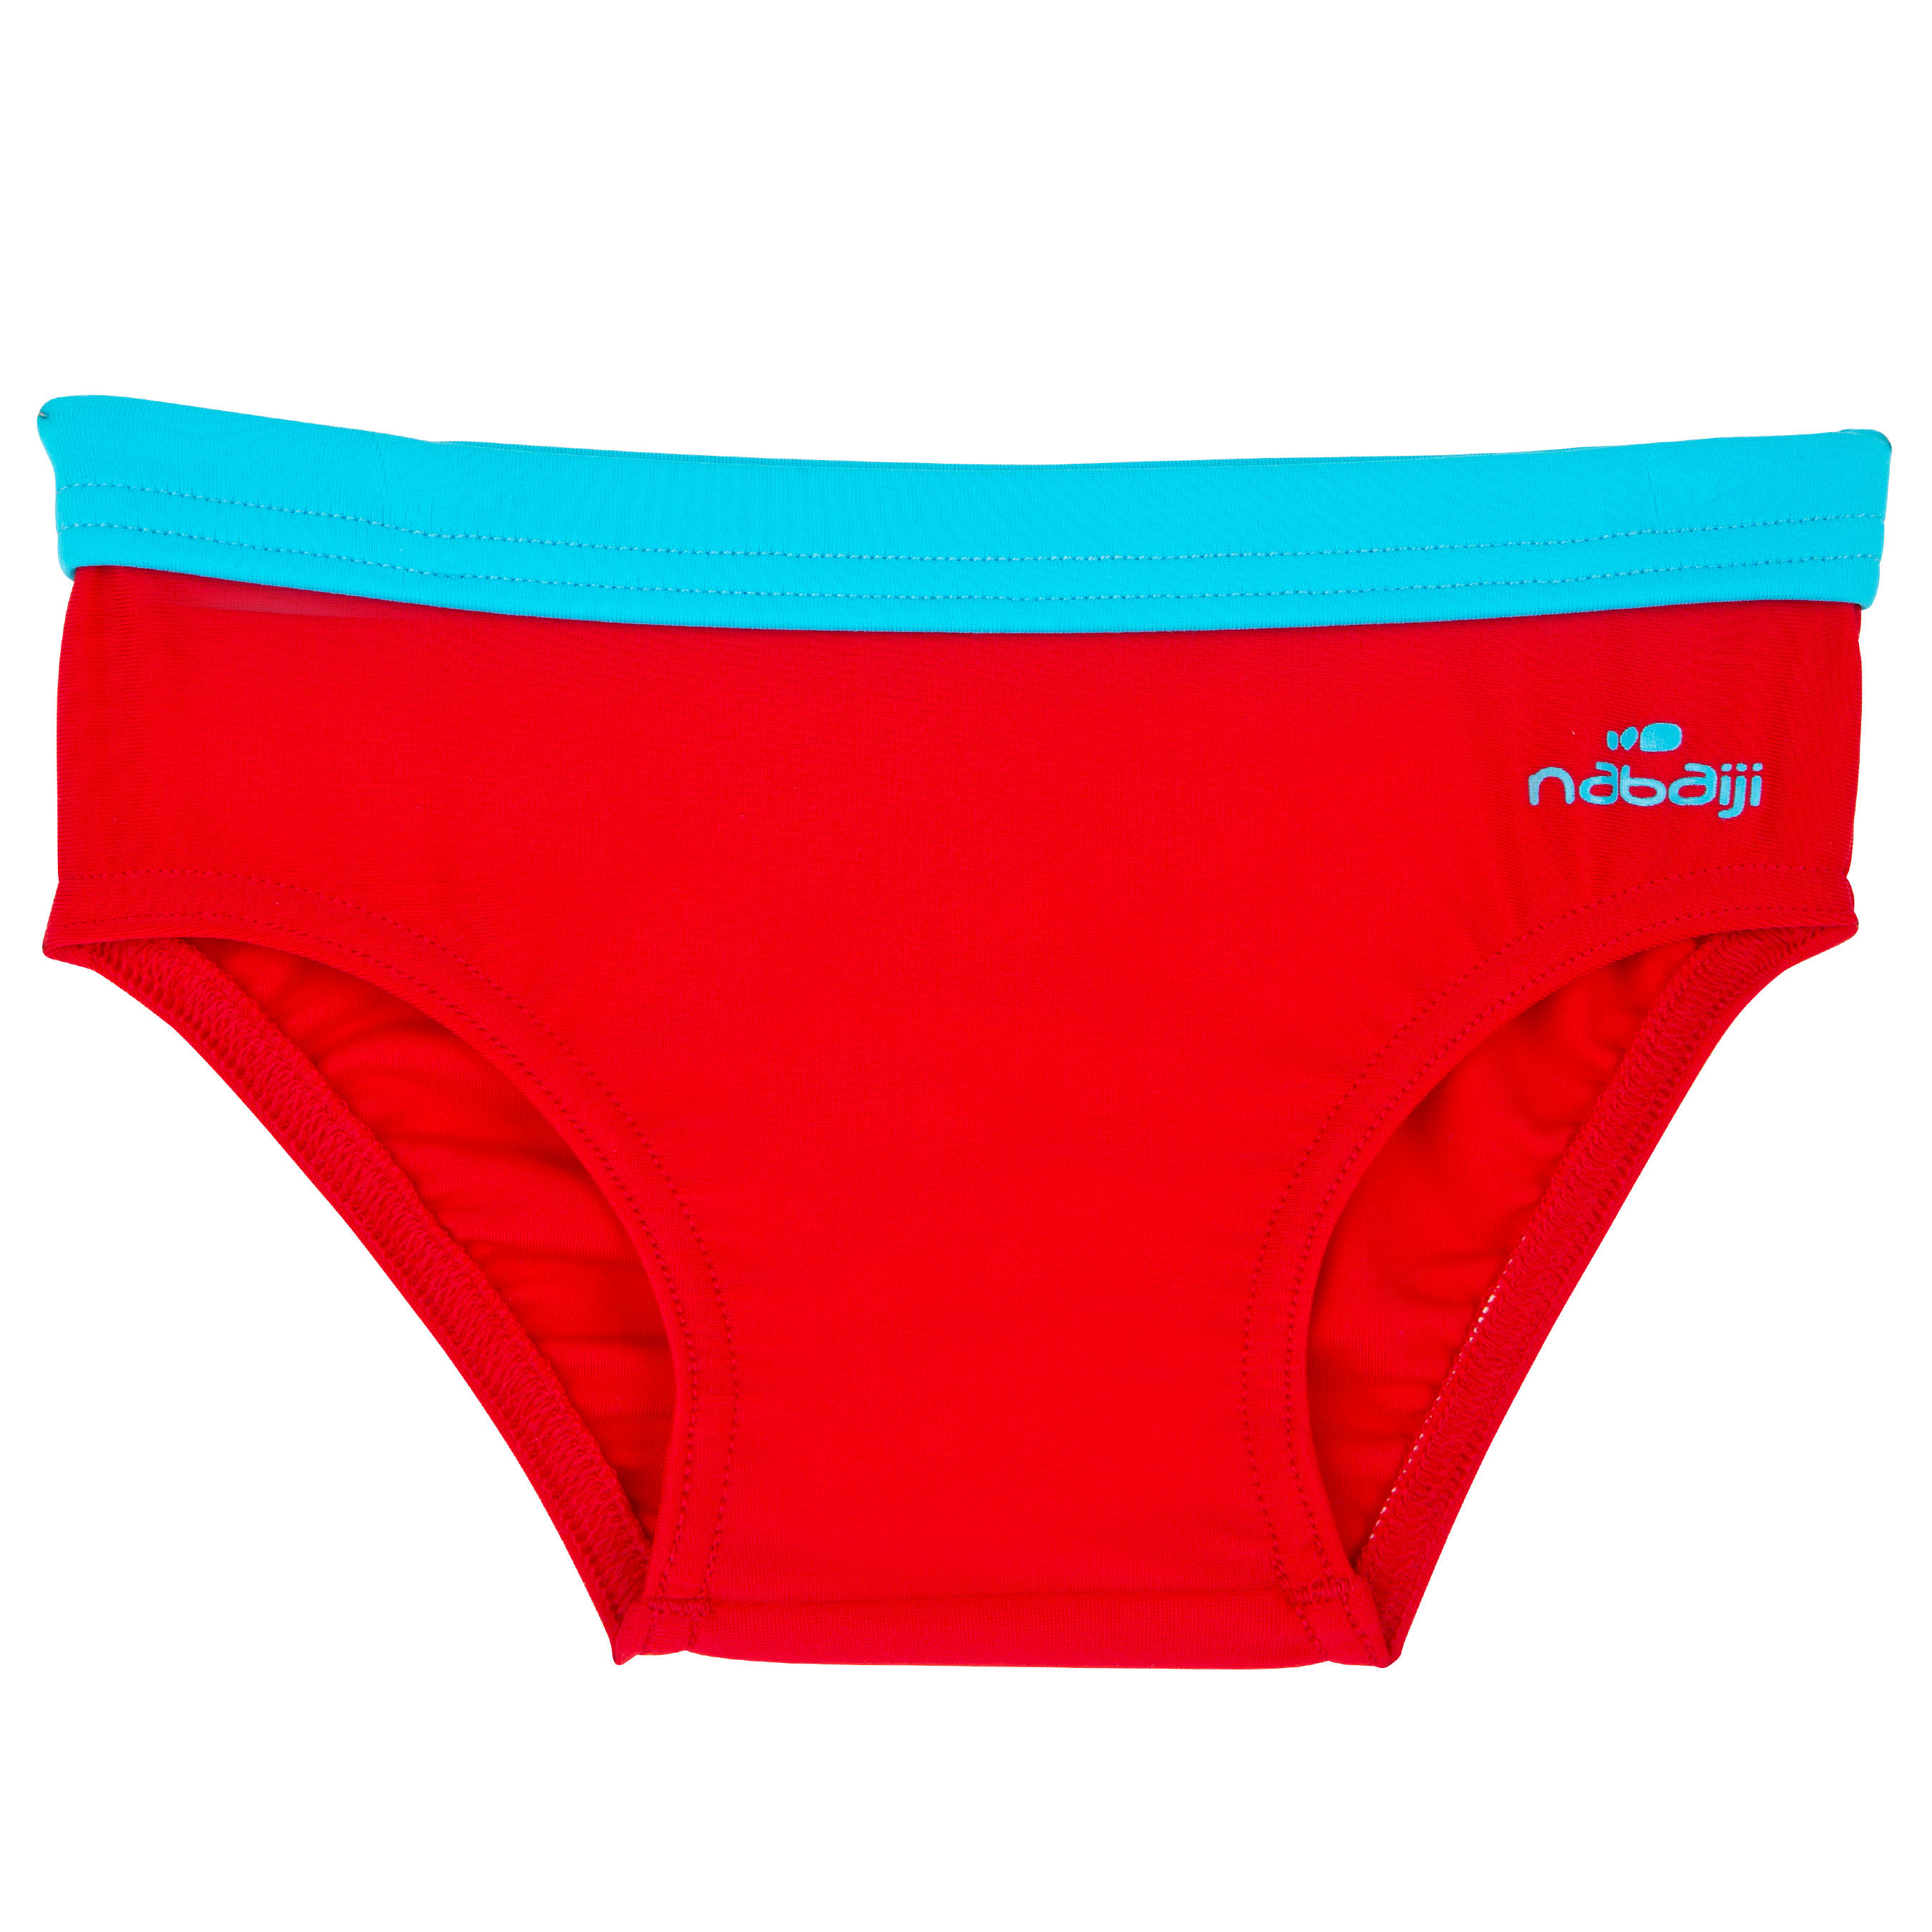 NABAIJI Baby boys' swimming trunks - Red and Blue